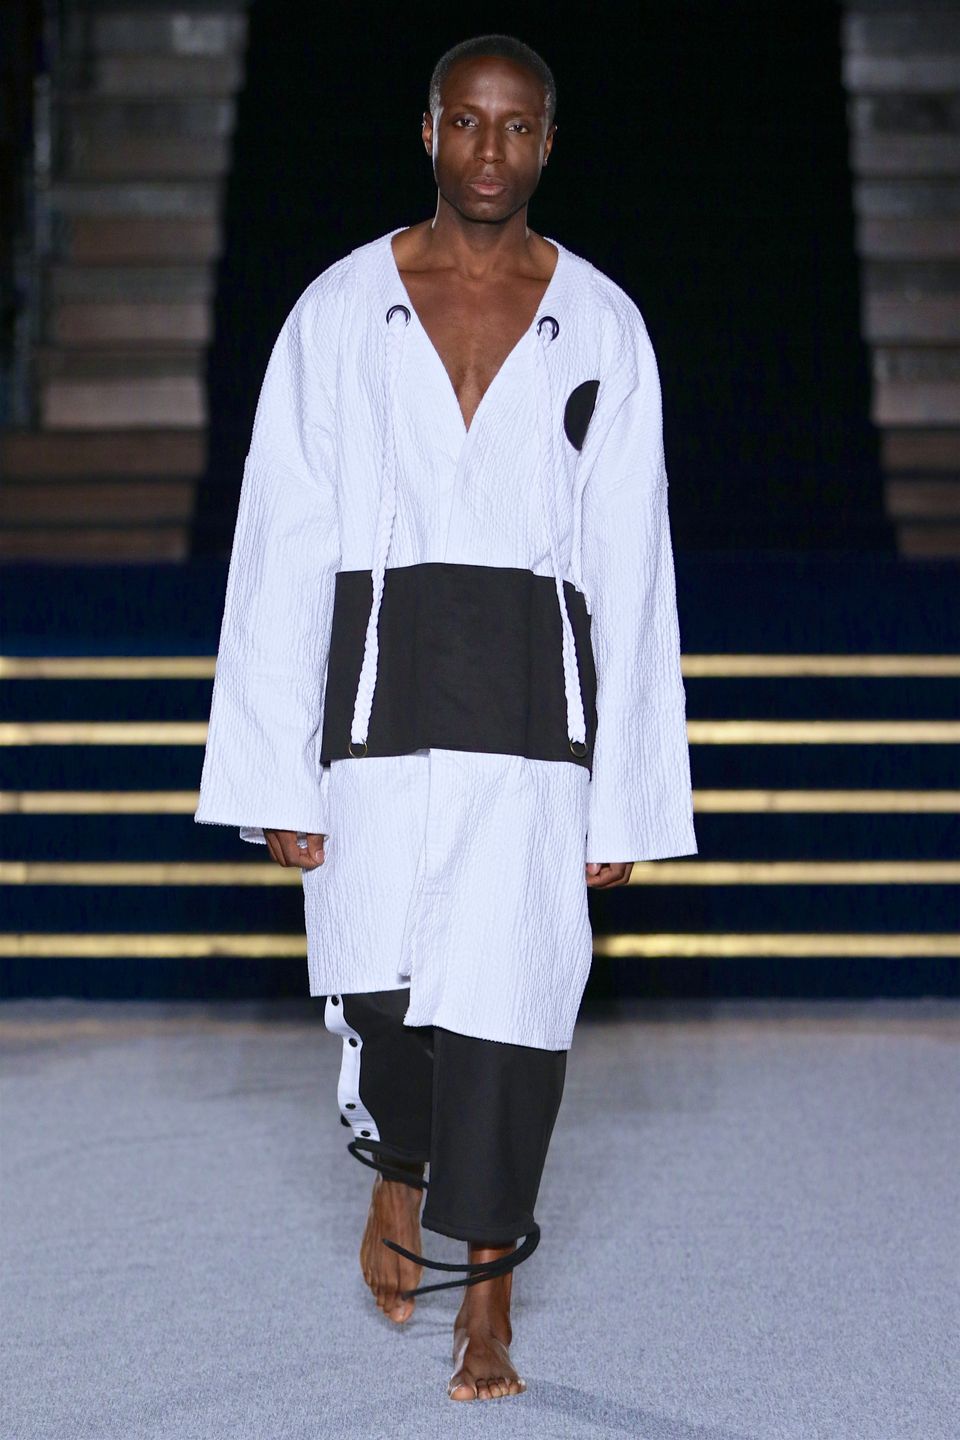 Africa Fashion Week London: The Hottest Looks From Day One | HuffPost ...